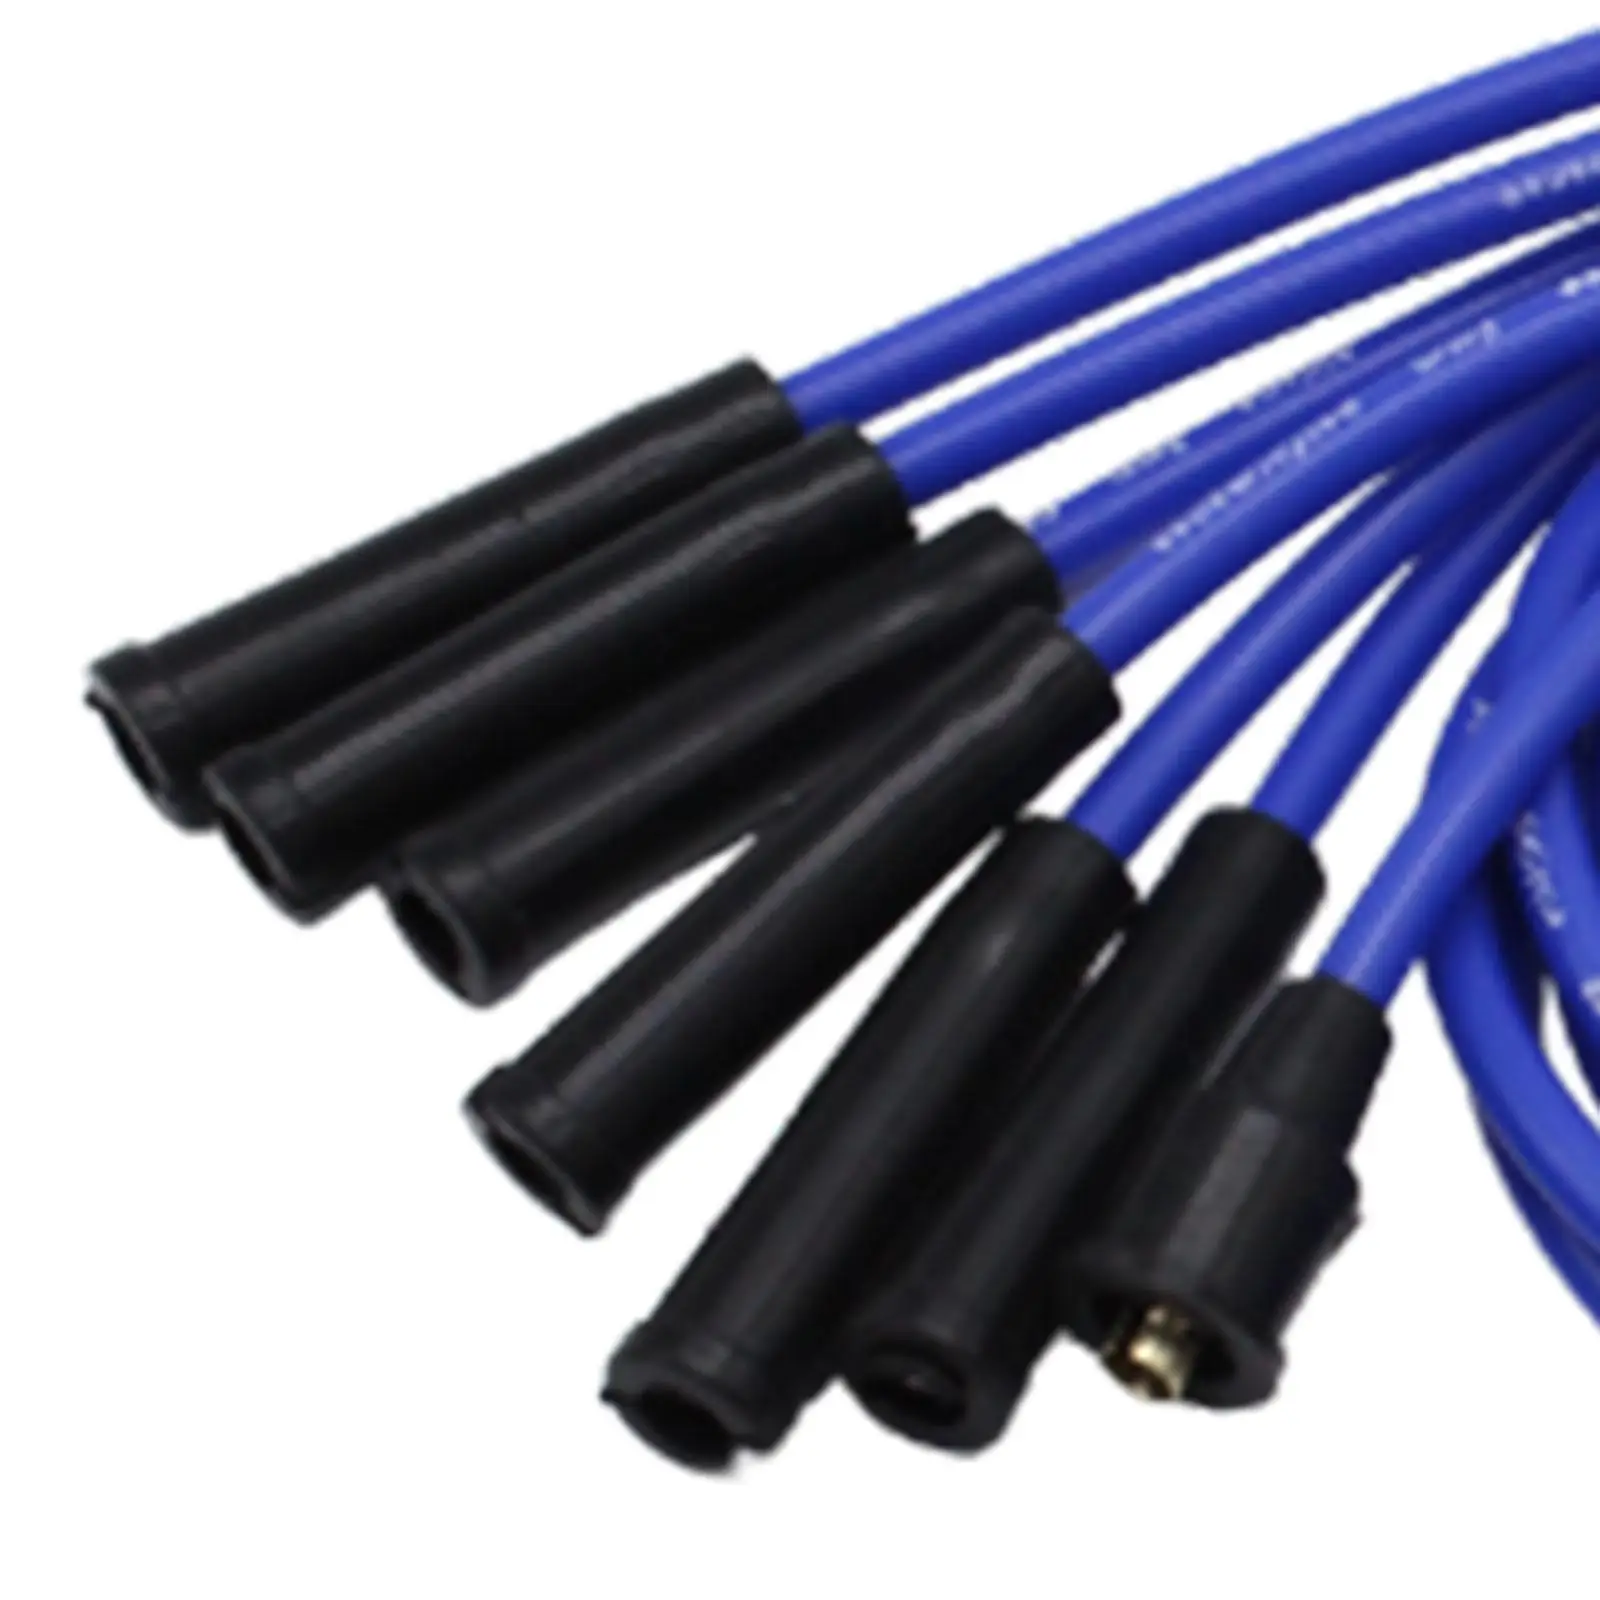 8mm HT Leads High Performance Blue Spark Plug Cables for 6 Cylinder Ignition